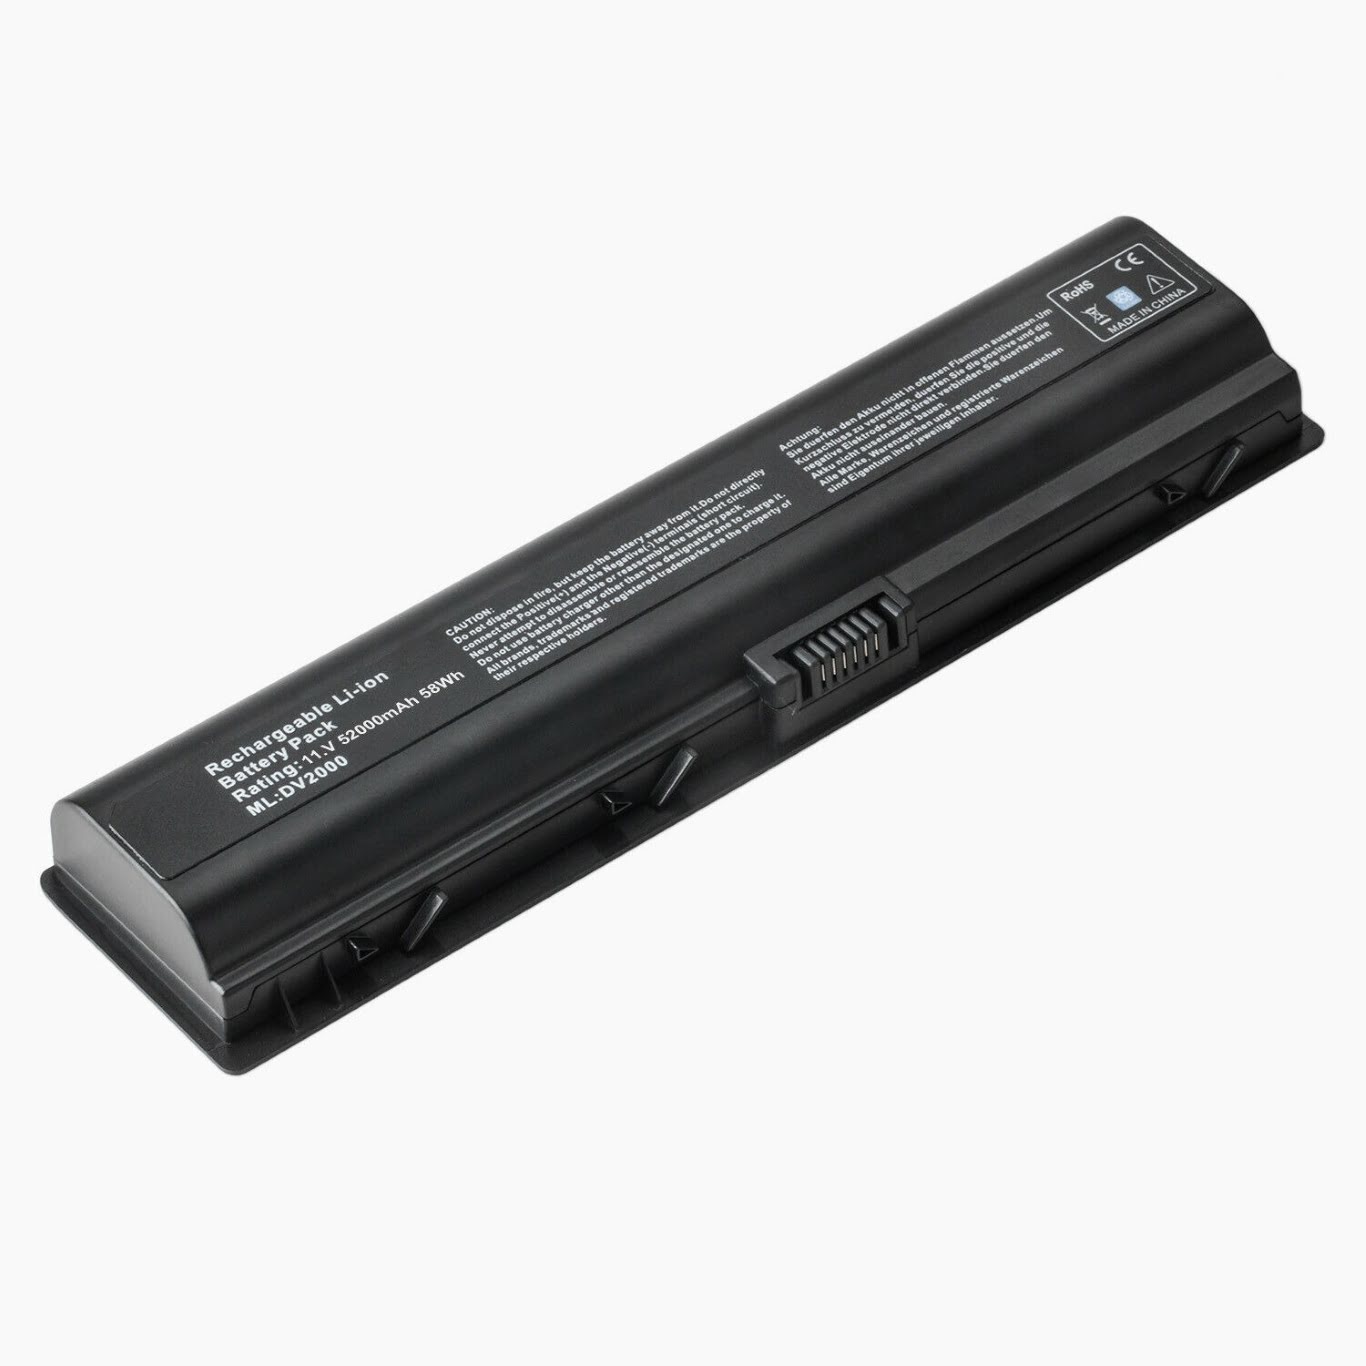 411462-121, 411462-141 replacement Laptop Battery for HP 6000XX, G6000